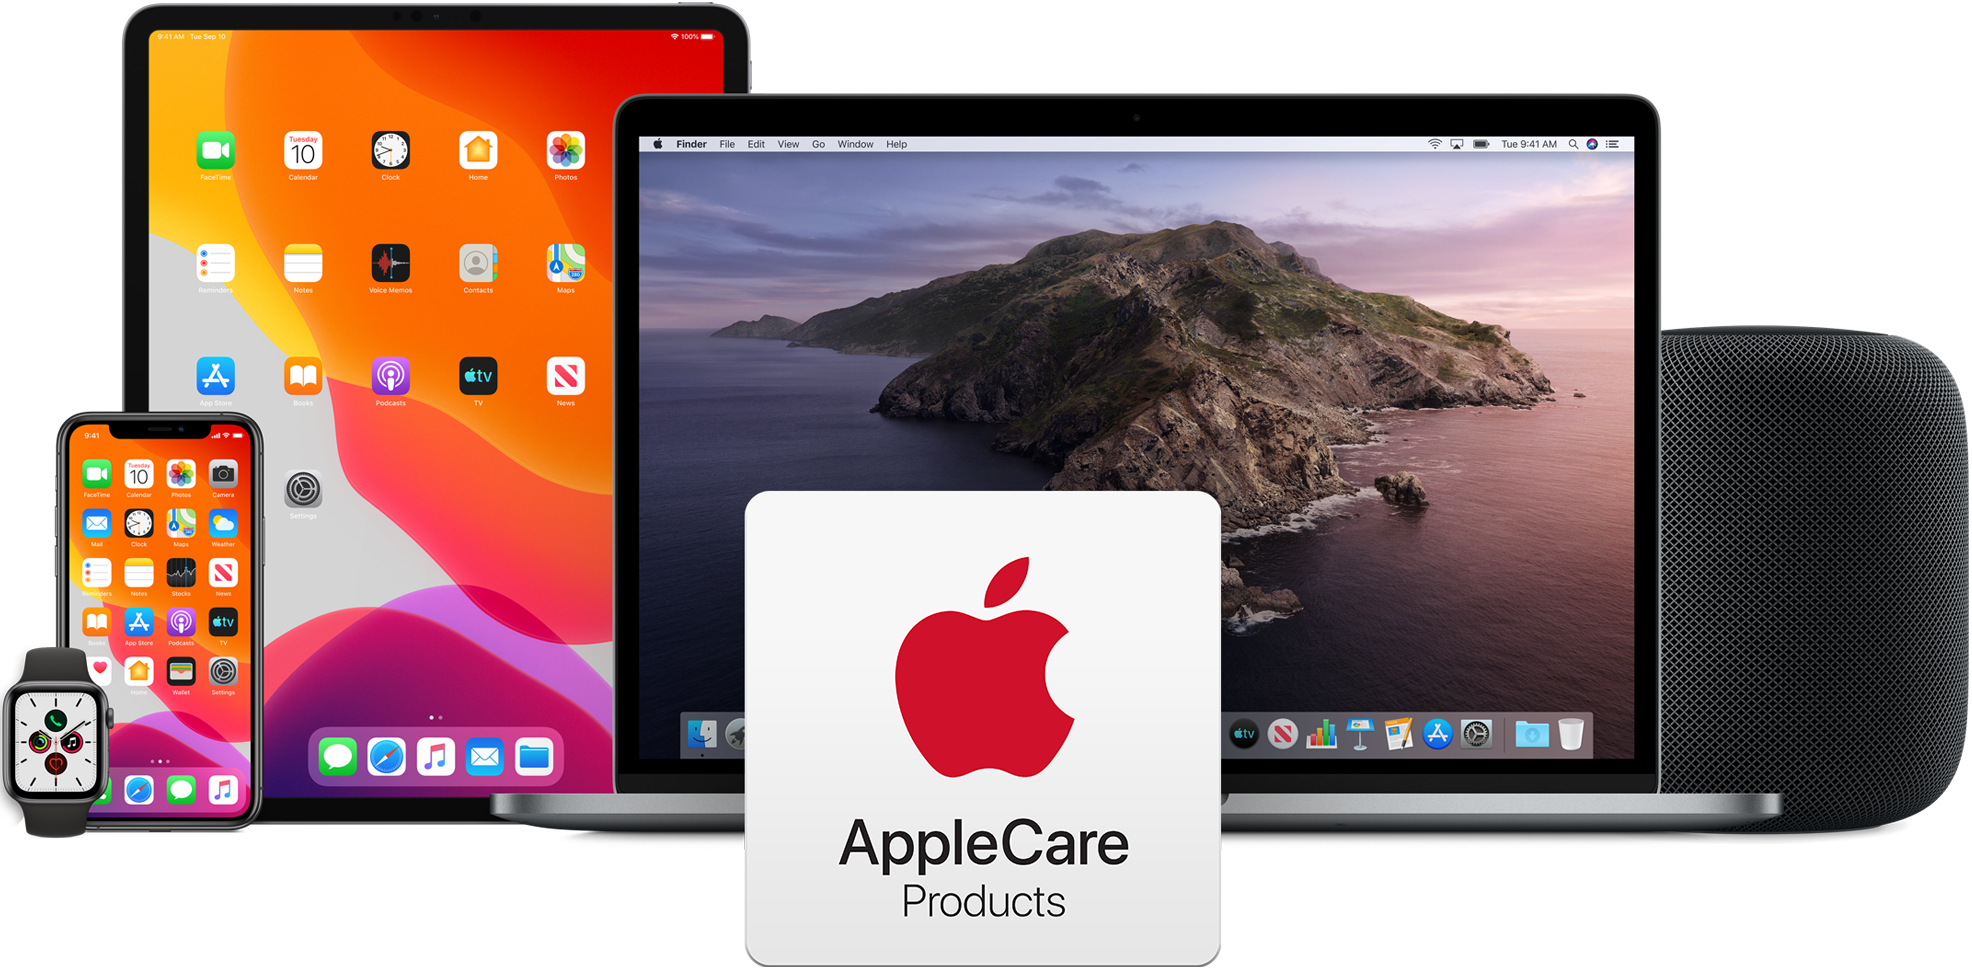 Class action involving AppleCare follows in court; Apple is accused of “modern piracy”